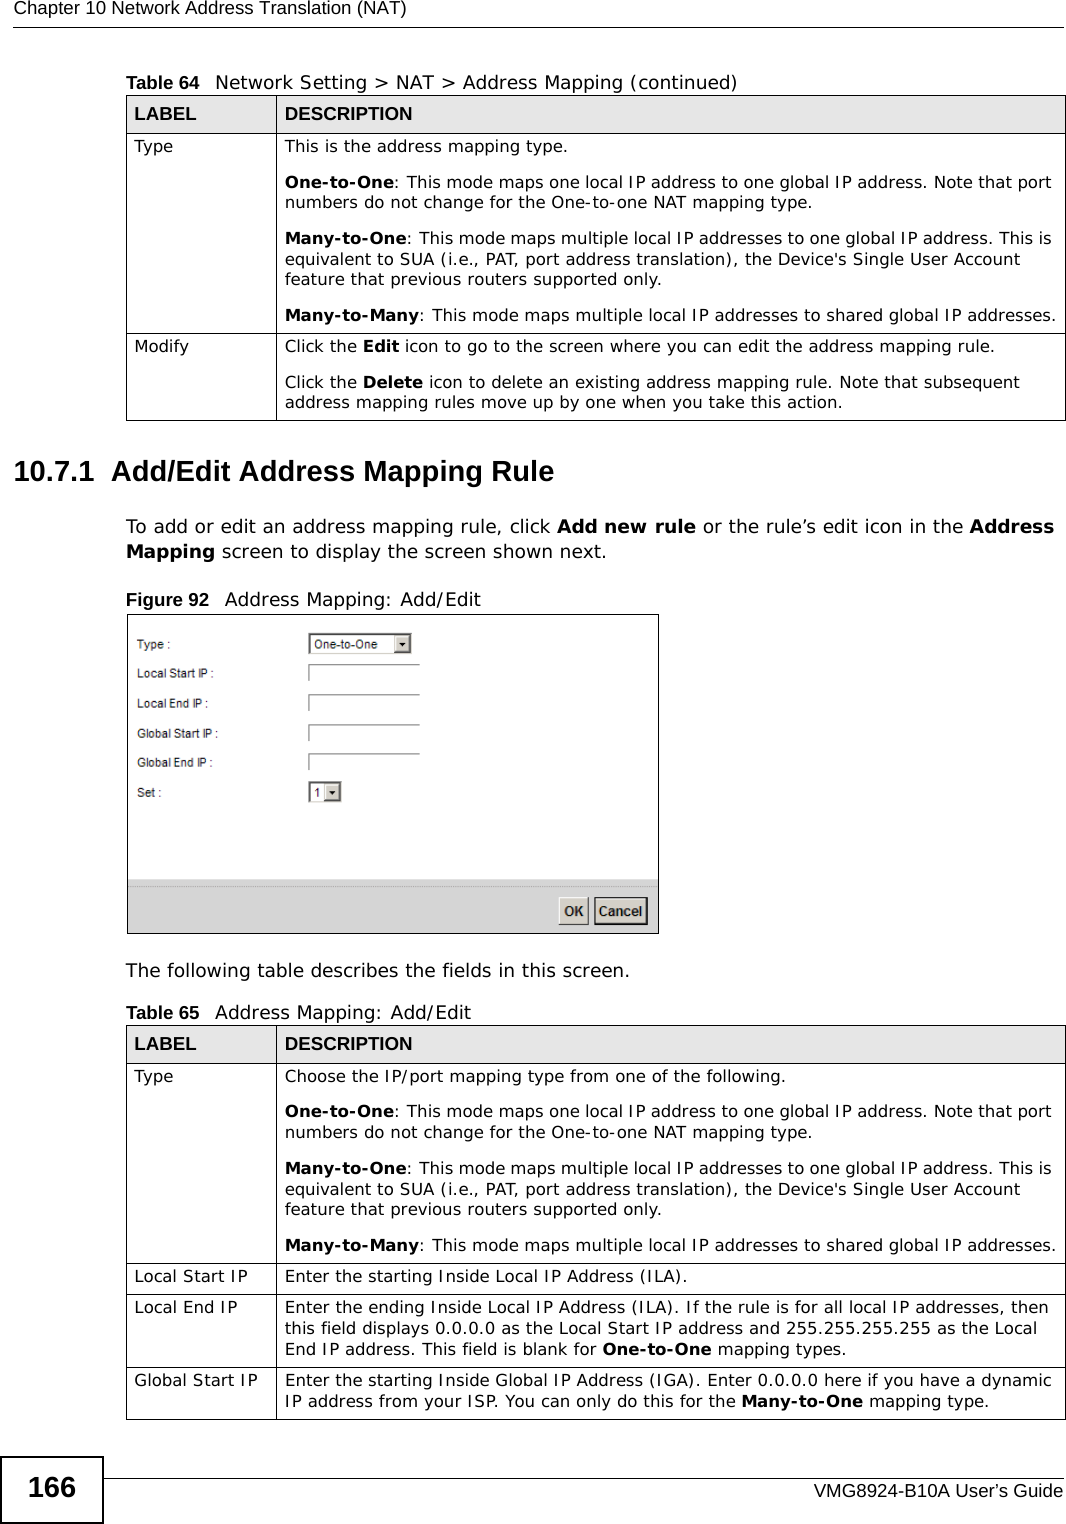 Chapter 10 Network Address Translation (NAT)VMG8924-B10A User’s Guide16610.7.1  Add/Edit Address Mapping RuleTo add or edit an address mapping rule, click Add new rule or the rule’s edit icon in the Address Mapping screen to display the screen shown next. Figure 92   Address Mapping: Add/EditThe following table describes the fields in this screen.Type This is the address mapping type.One-to-One: This mode maps one local IP address to one global IP address. Note that port numbers do not change for the One-to-one NAT mapping type.Many-to-One: This mode maps multiple local IP addresses to one global IP address. This is equivalent to SUA (i.e., PAT, port address translation), the Device&apos;s Single User Account feature that previous routers supported only. Many-to-Many: This mode maps multiple local IP addresses to shared global IP addresses.Modify Click the Edit icon to go to the screen where you can edit the address mapping rule.Click the Delete icon to delete an existing address mapping rule. Note that subsequent address mapping rules move up by one when you take this action.Table 64   Network Setting &gt; NAT &gt; Address Mapping (continued)LABEL DESCRIPTIONTable 65   Address Mapping: Add/EditLABEL DESCRIPTIONType Choose the IP/port mapping type from one of the following.One-to-One: This mode maps one local IP address to one global IP address. Note that port numbers do not change for the One-to-one NAT mapping type.Many-to-One: This mode maps multiple local IP addresses to one global IP address. This is equivalent to SUA (i.e., PAT, port address translation), the Device&apos;s Single User Account feature that previous routers supported only. Many-to-Many: This mode maps multiple local IP addresses to shared global IP addresses.Local Start IP Enter the starting Inside Local IP Address (ILA).Local End IP Enter the ending Inside Local IP Address (ILA). If the rule is for all local IP addresses, then this field displays 0.0.0.0 as the Local Start IP address and 255.255.255.255 as the Local End IP address. This field is blank for One-to-One mapping types.Global Start IP Enter the starting Inside Global IP Address (IGA). Enter 0.0.0.0 here if you have a dynamic IP address from your ISP. You can only do this for the Many-to-One mapping type. 